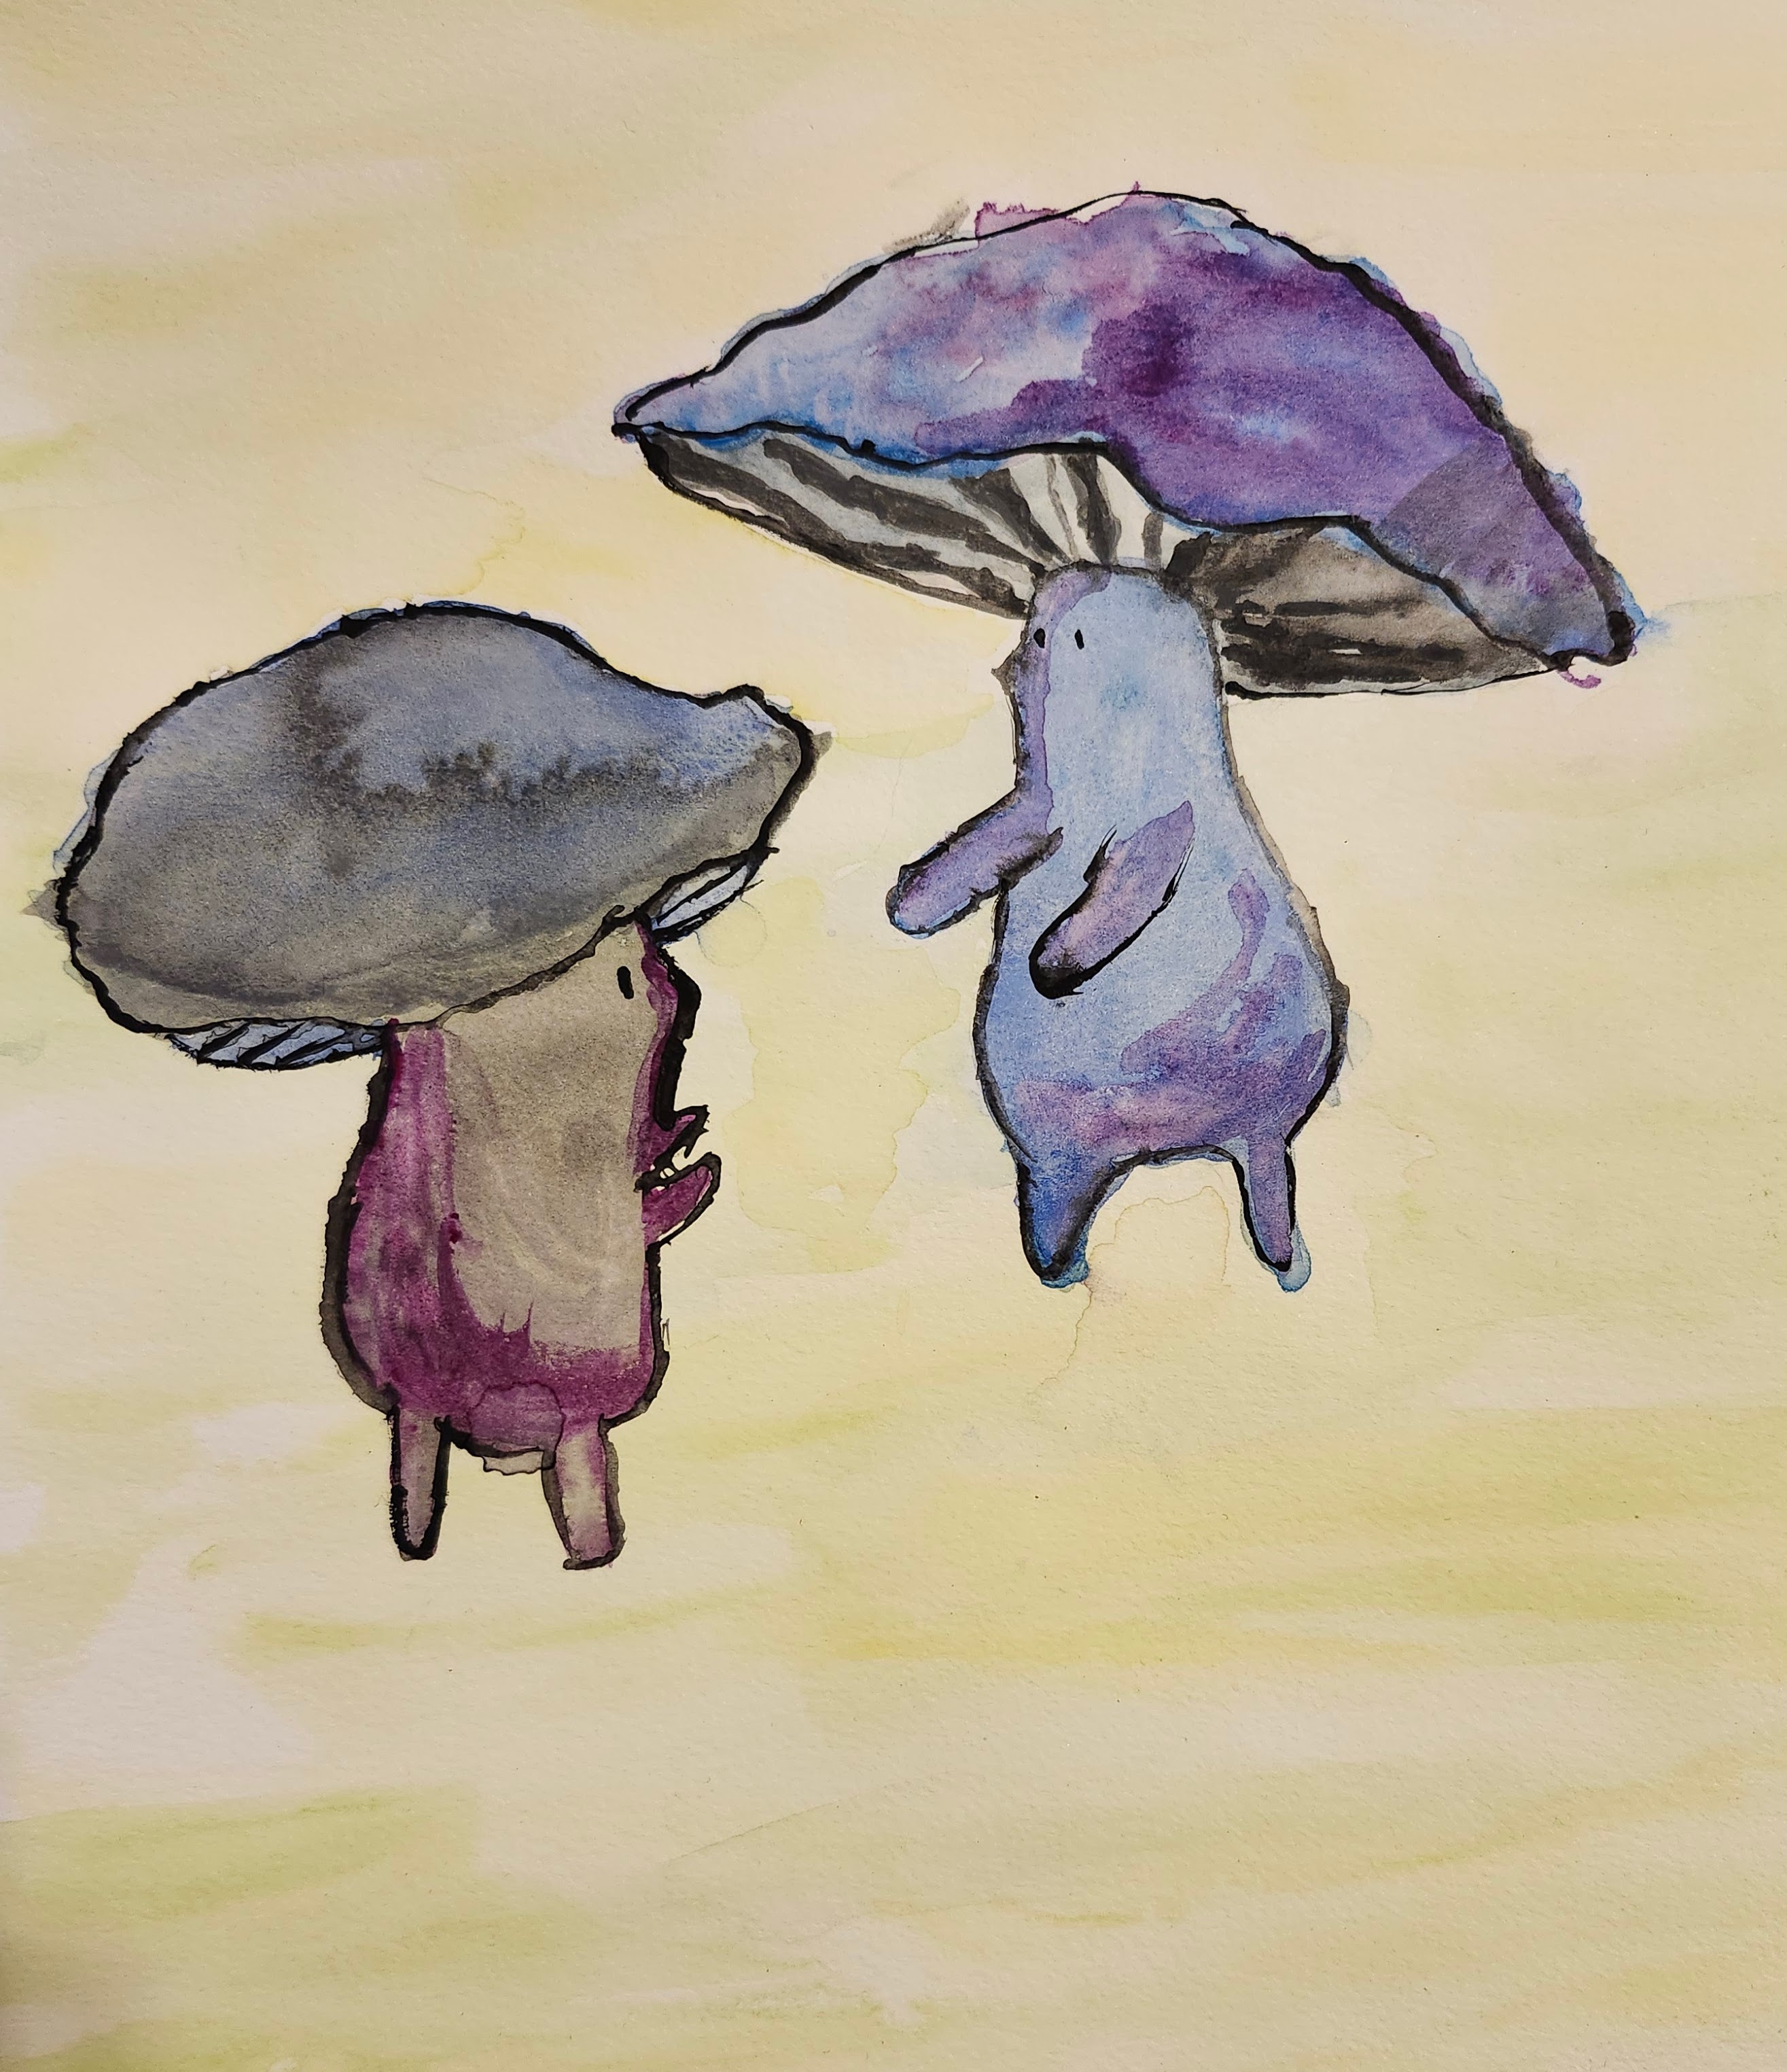 two anthropomorphic mushrooms reaching towards each other, watercolor